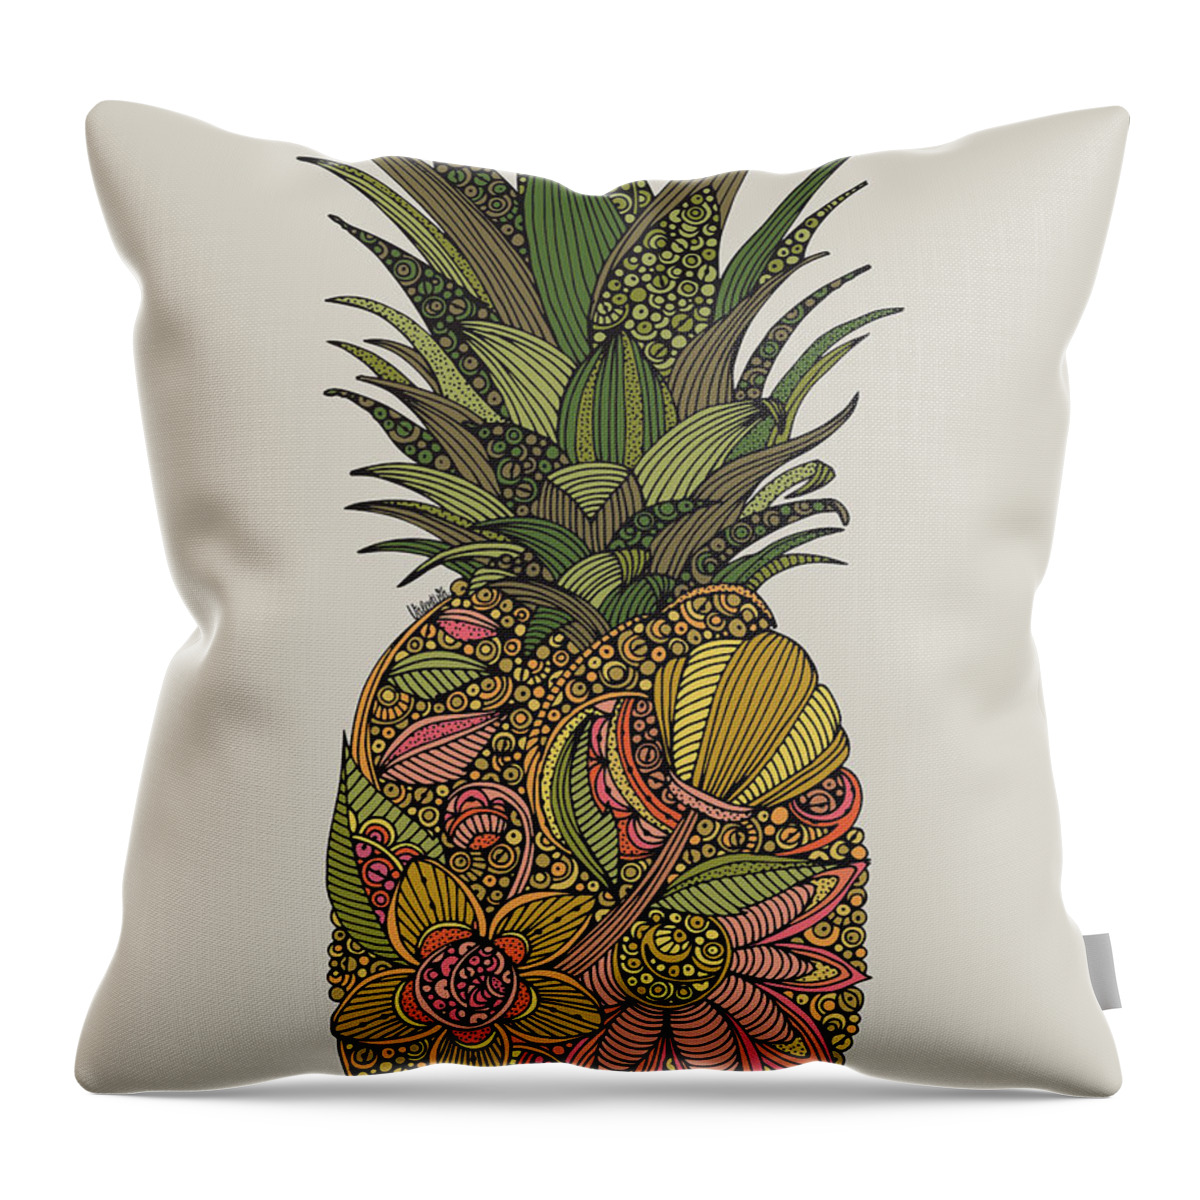 Pineapple Throw Pillow featuring the digital art Pineapple by MGL Meiklejohn Graphics Licensing